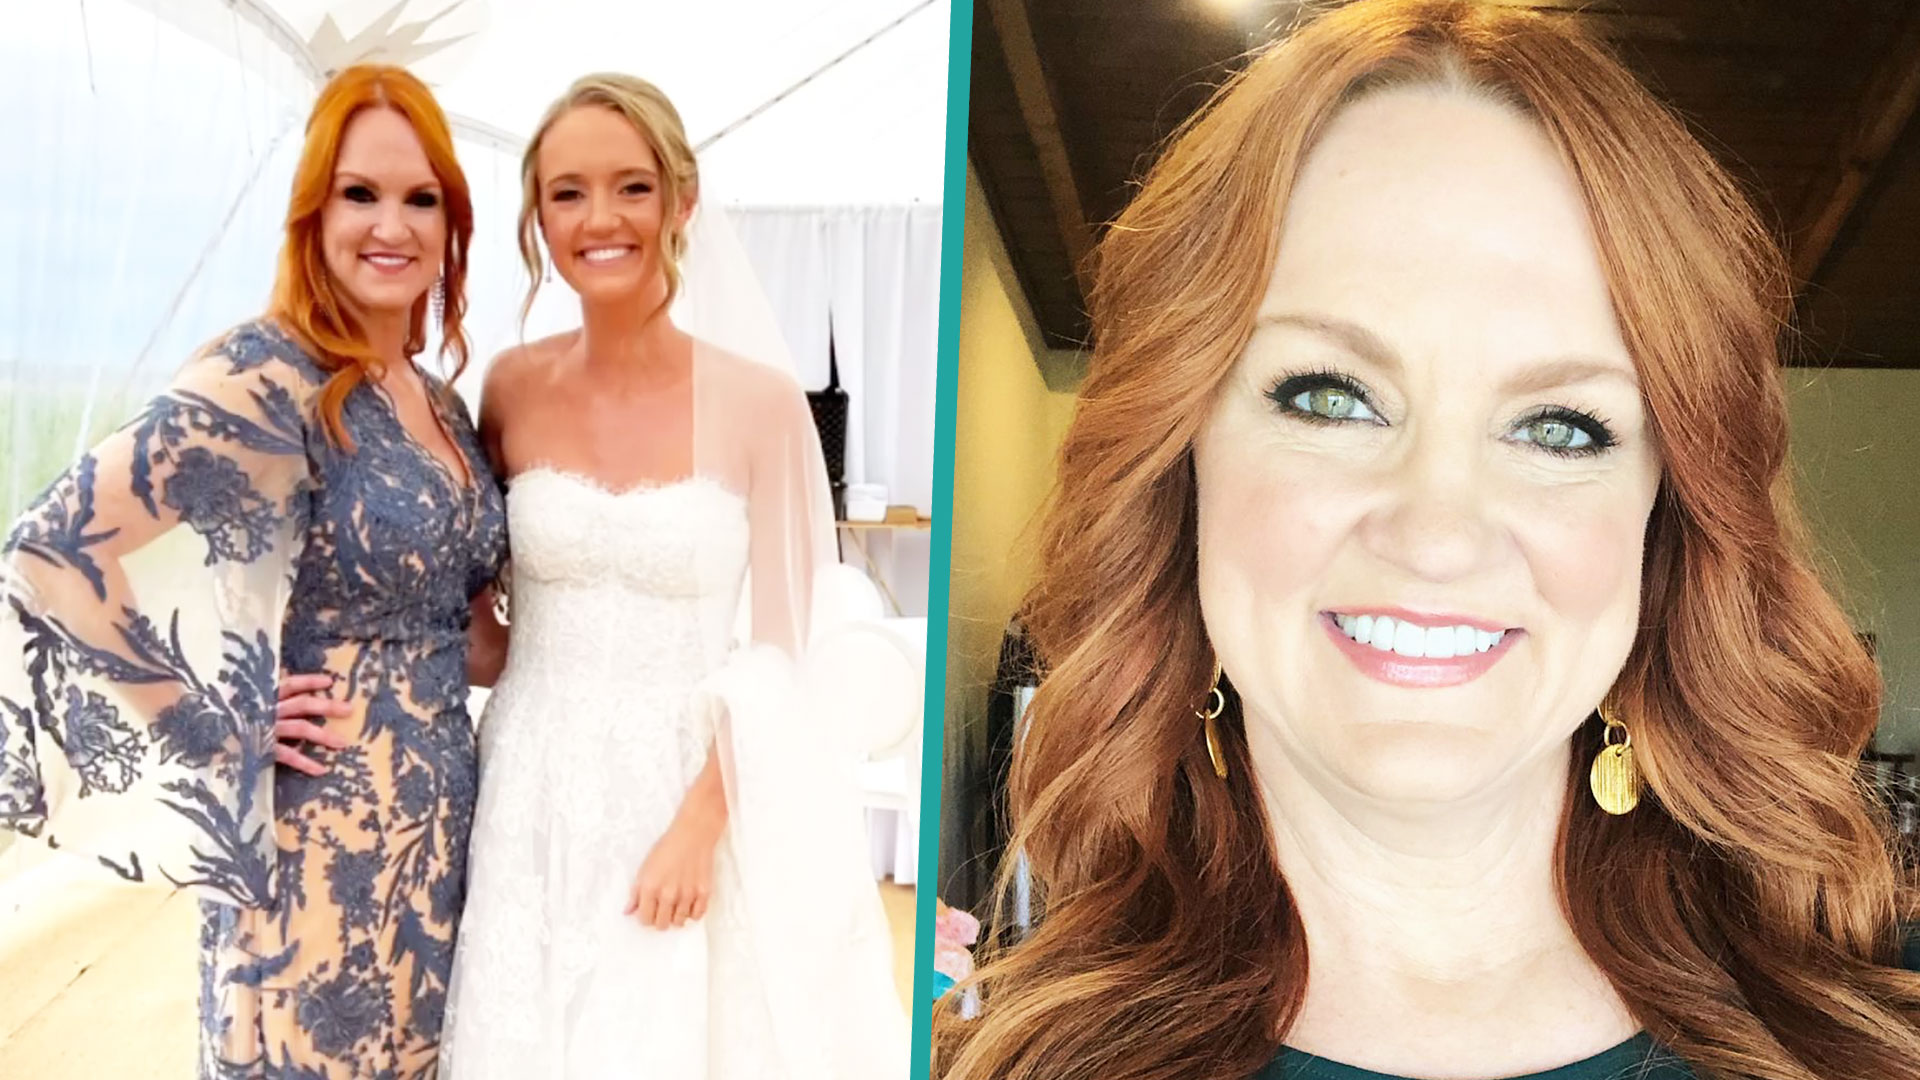 Ree Drummond Shares More Photos And Details From Daughter